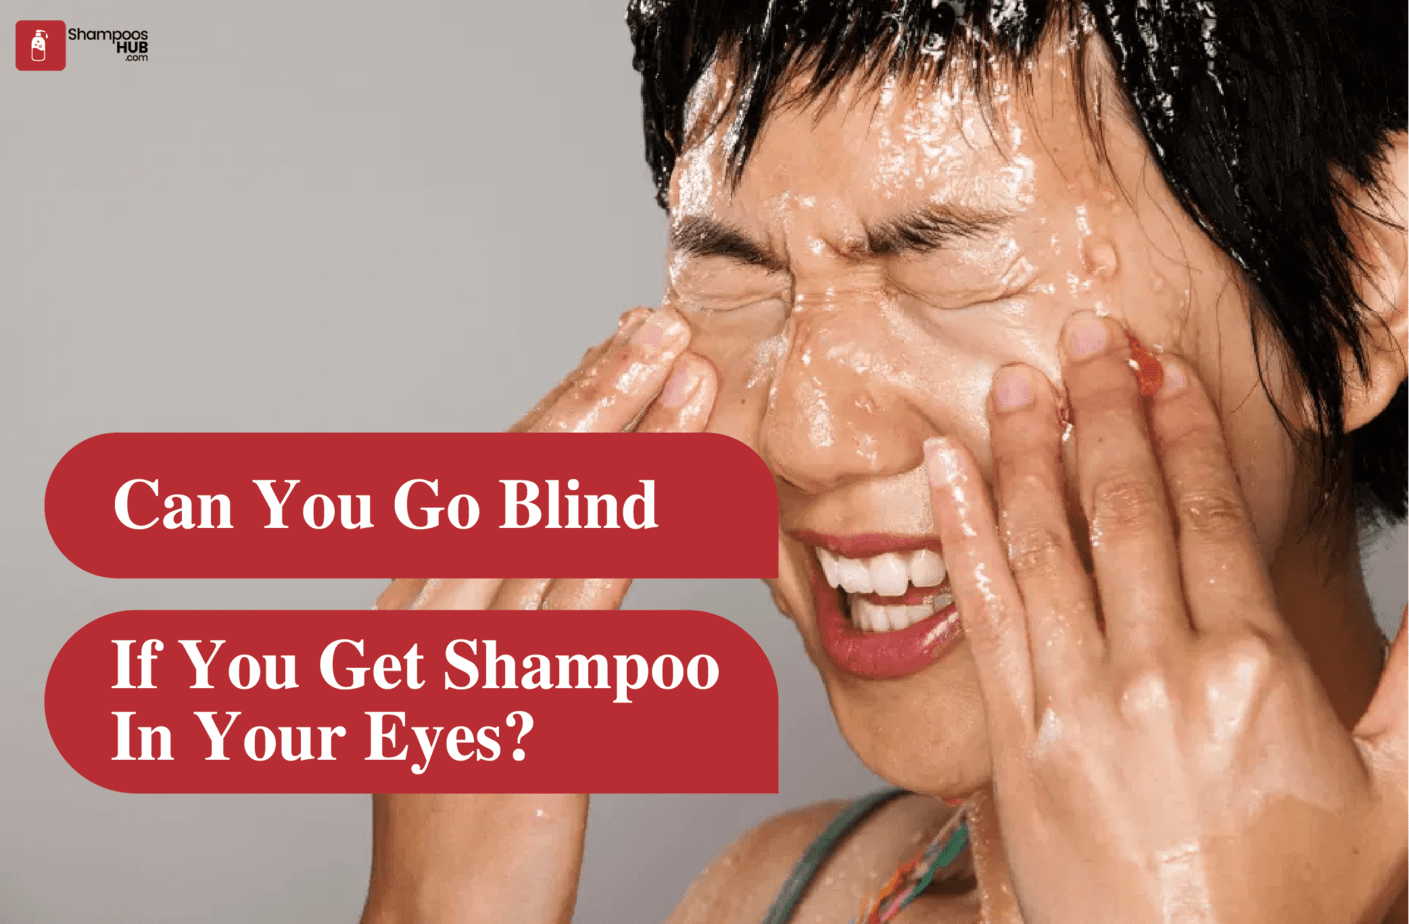 Can You Go Blind If You Get Shampoo In Your Eyes?